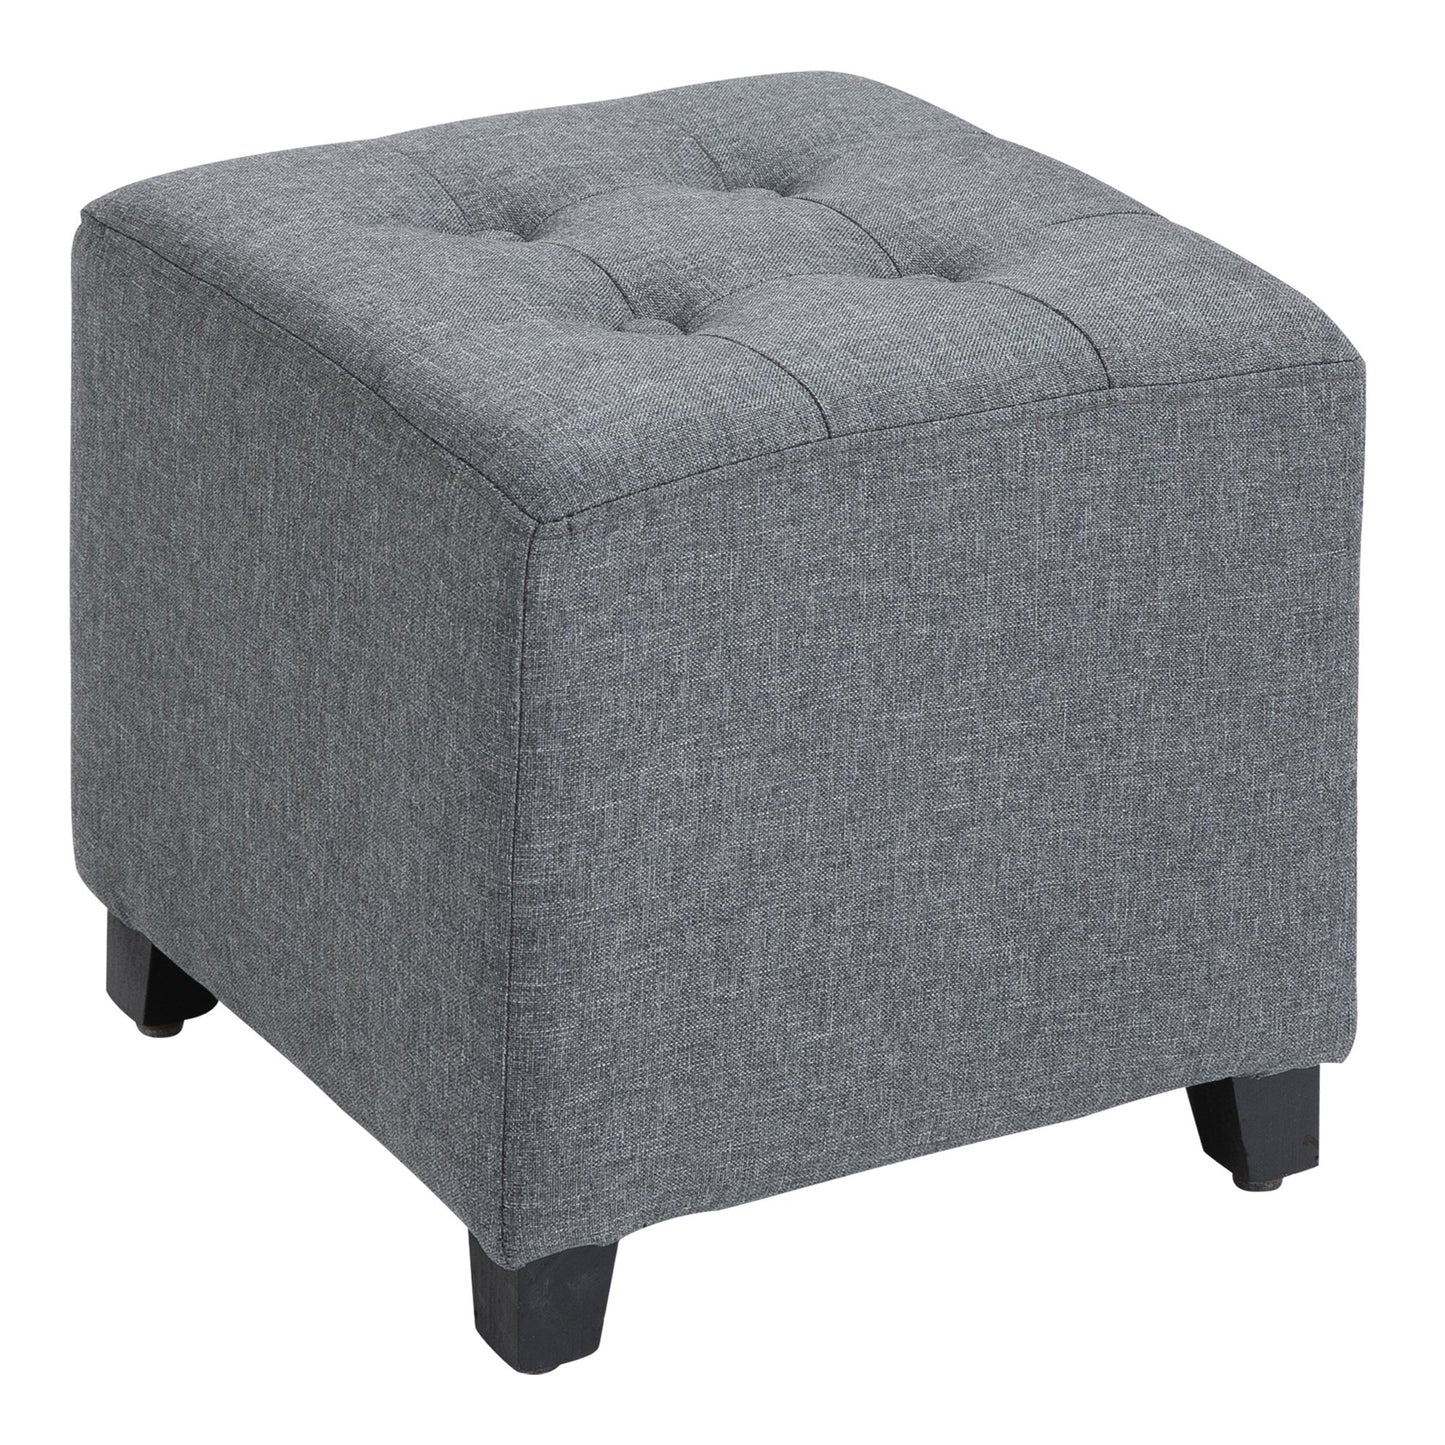 HOMCOM Footstool Ottoman Tufted Ottoman Coffee Table Linen-Touch Fabric Footrest-Grey